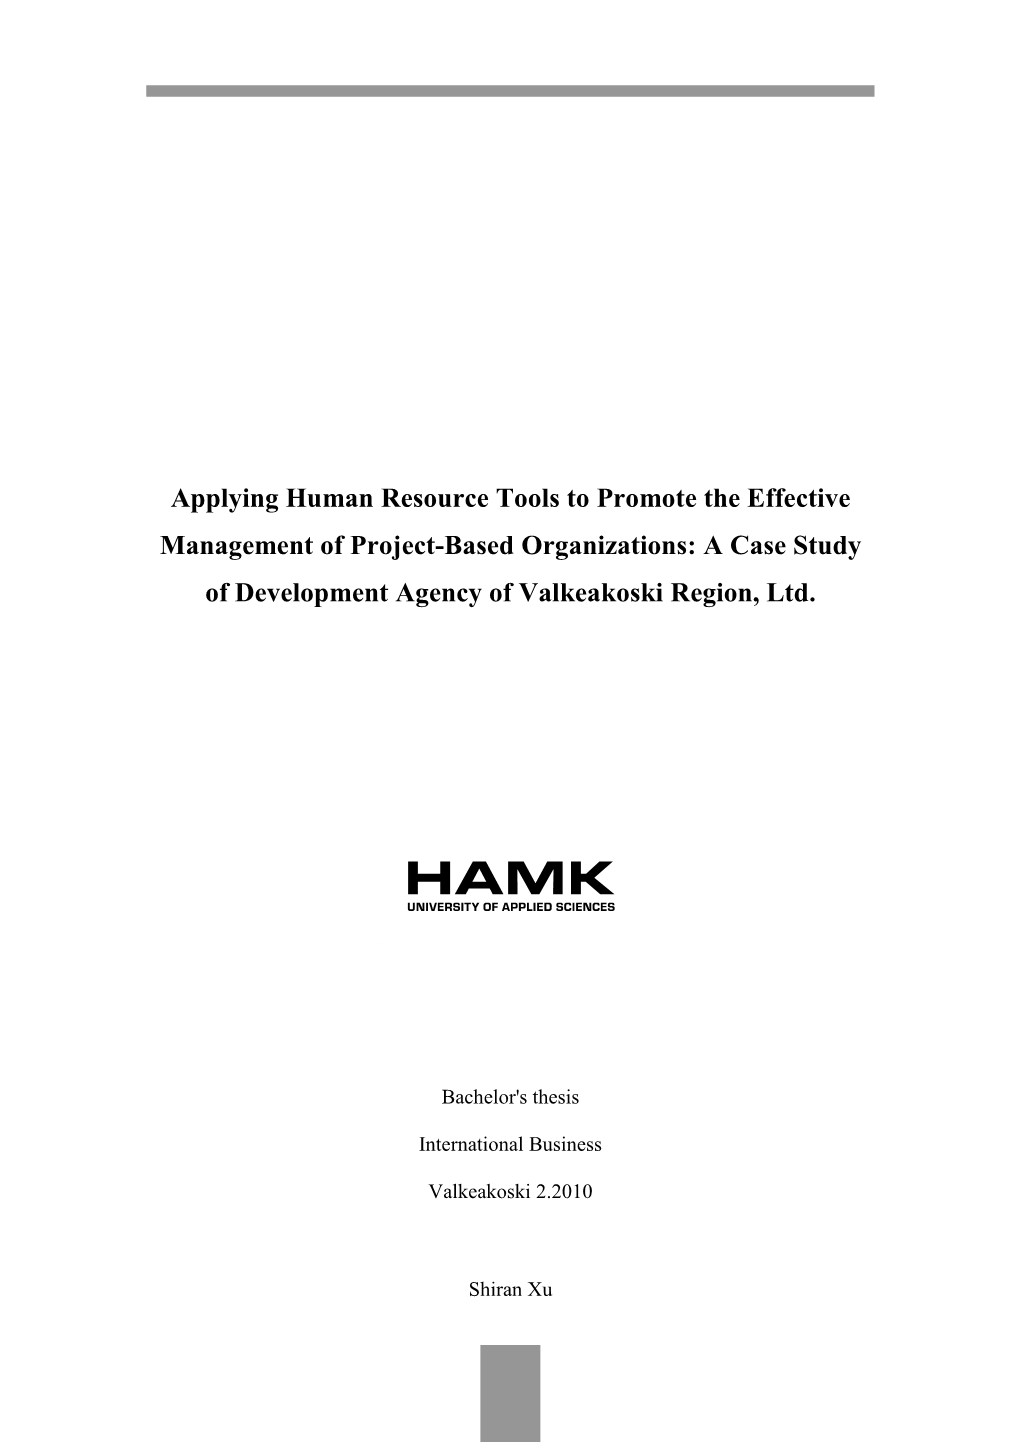 Applying Human Resource Tools to Promote the Effective Management of Project-Based Organizations: a Case Study of Development Agency of Valkeakoski Region, Ltd